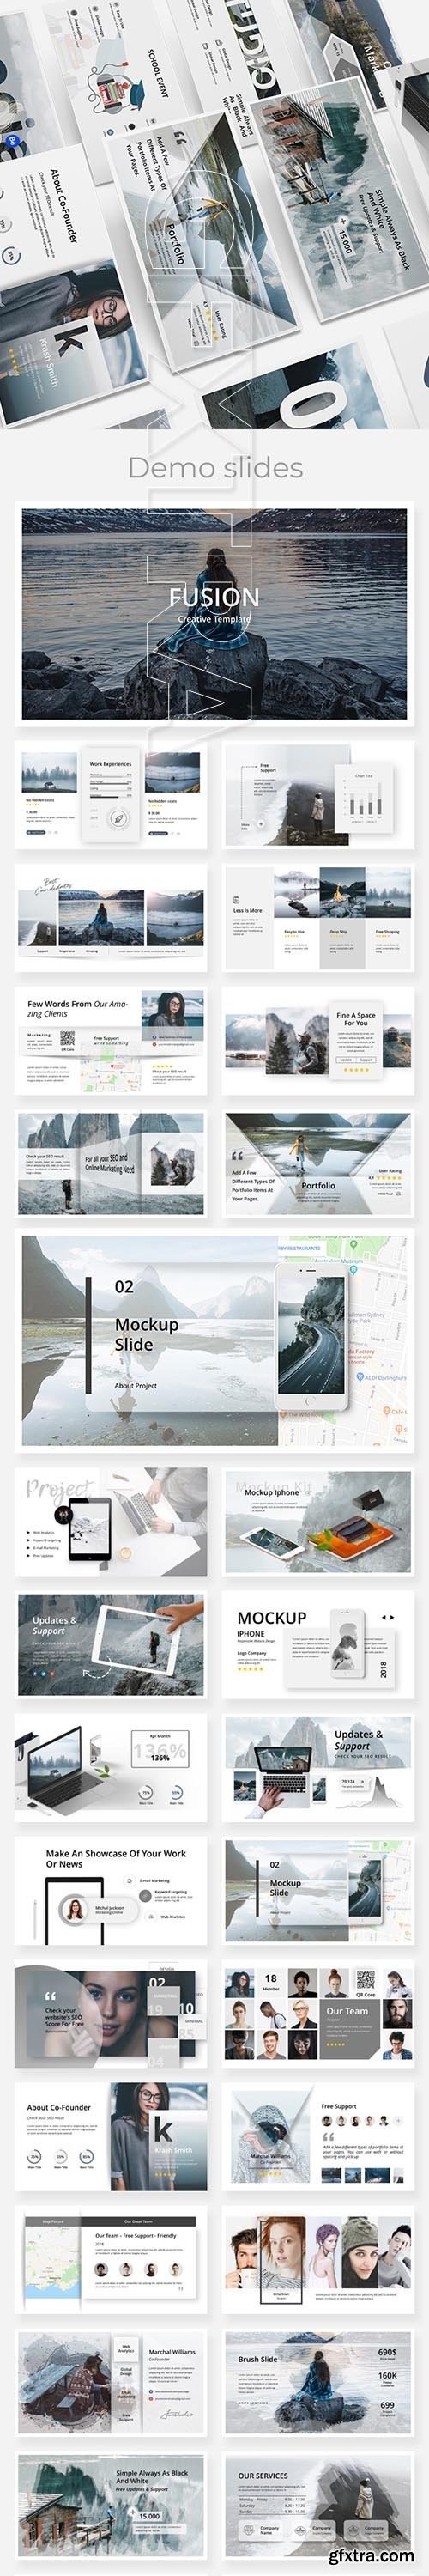 GraphicRiver - Fusion Creative Powerpoint Template 22642398